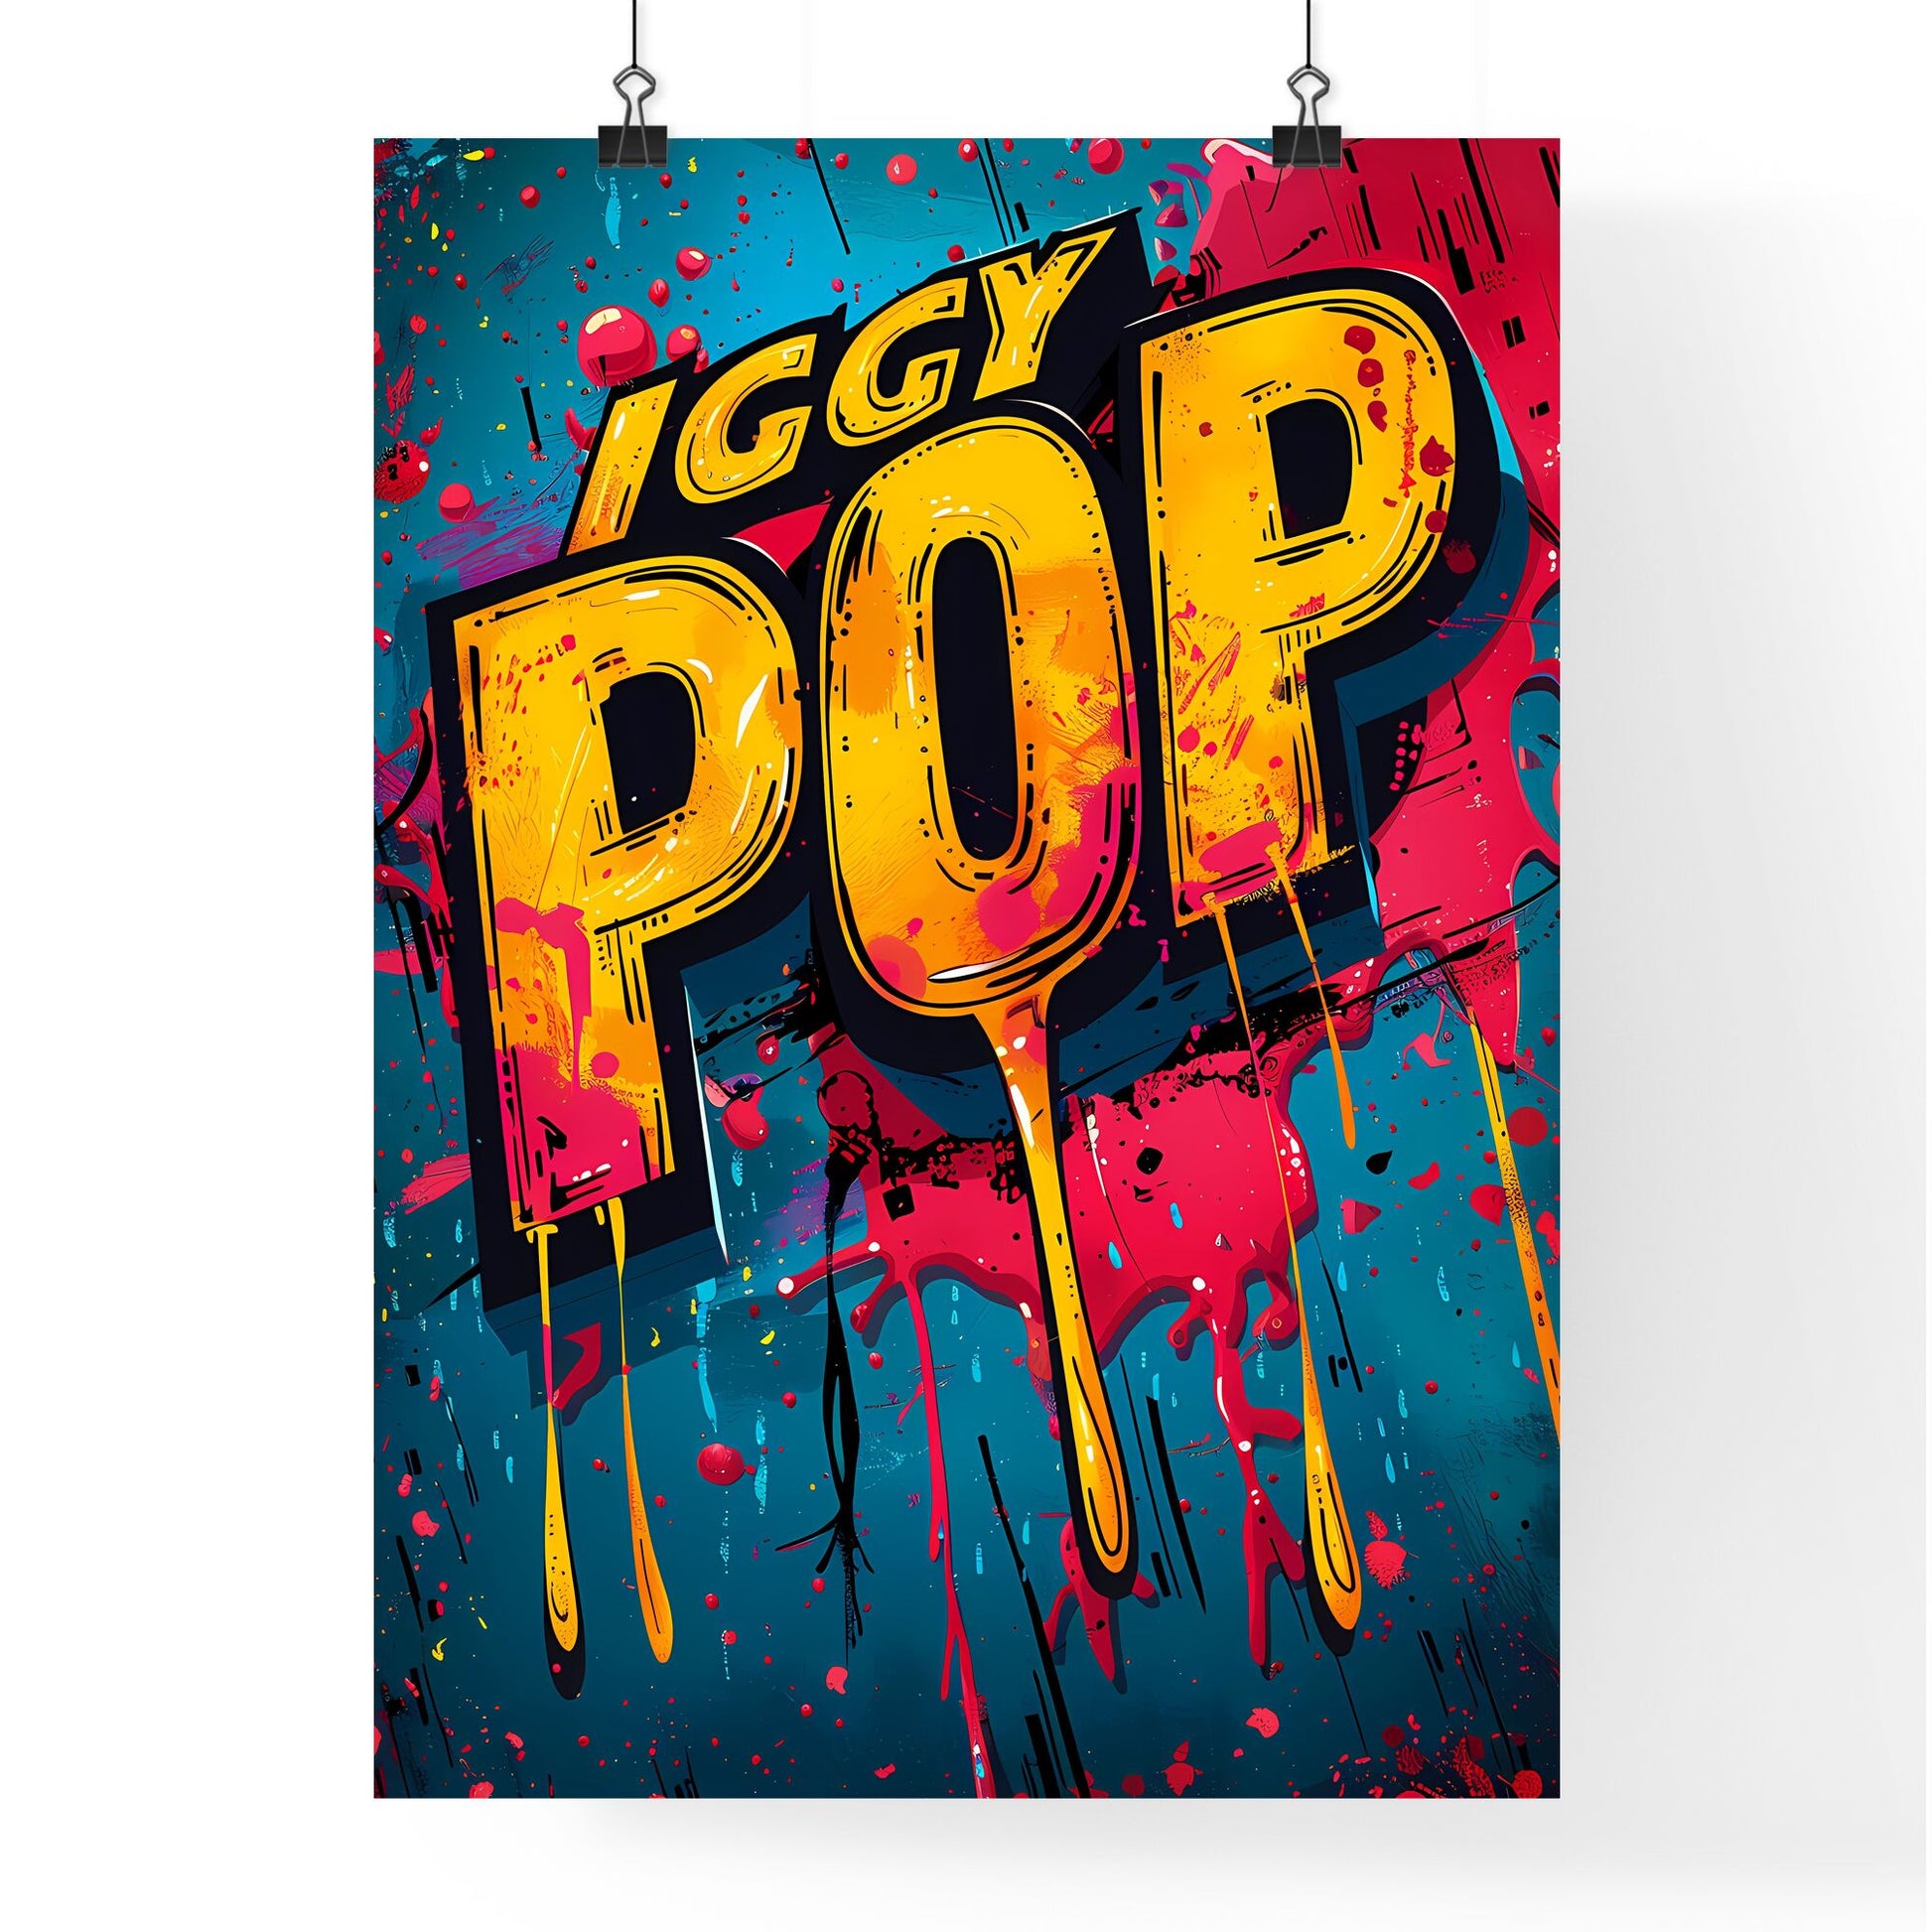 Vibrant Pop Art Painting: Geometric Shapes, Circle Screening, Vivid Colors, Word IGGY, Word POP, Exclamation, Splashes, Colored Drips Default Title